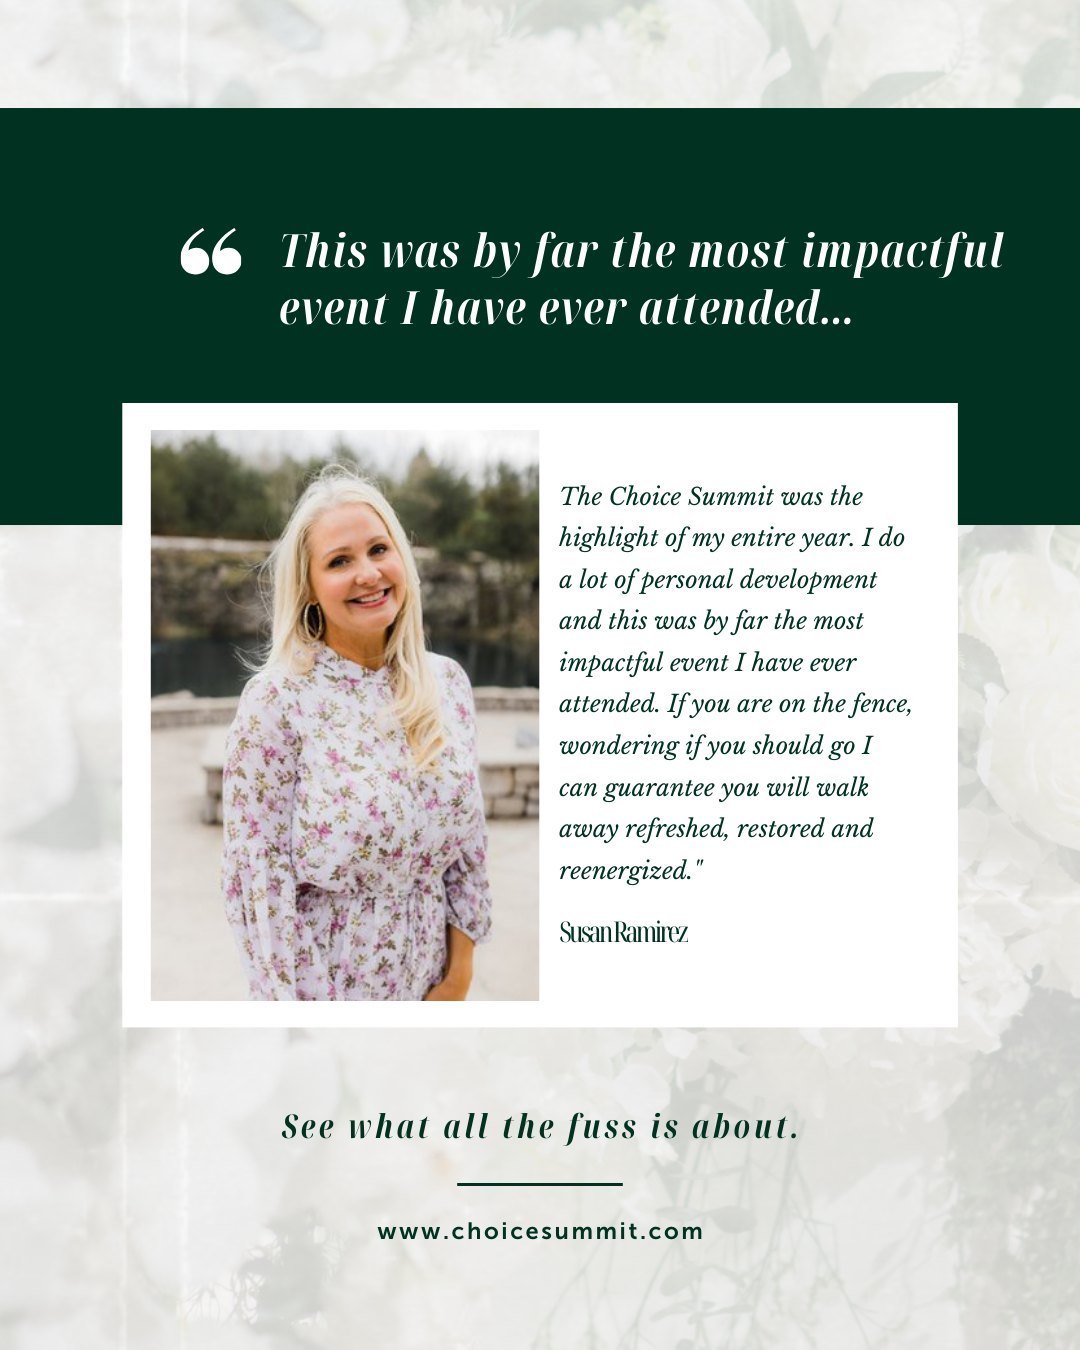 HEAR WHAT THEY&rsquo;RE SAYING&hellip;⁠
⁠
Here&rsquo;s what one of our past Summit attendees has to say about her experience at the Choice Summit 🙌🏼⁠
⁠
&quot;The Choice Summit was the highlight of my entire year. I do a lot of personal development 